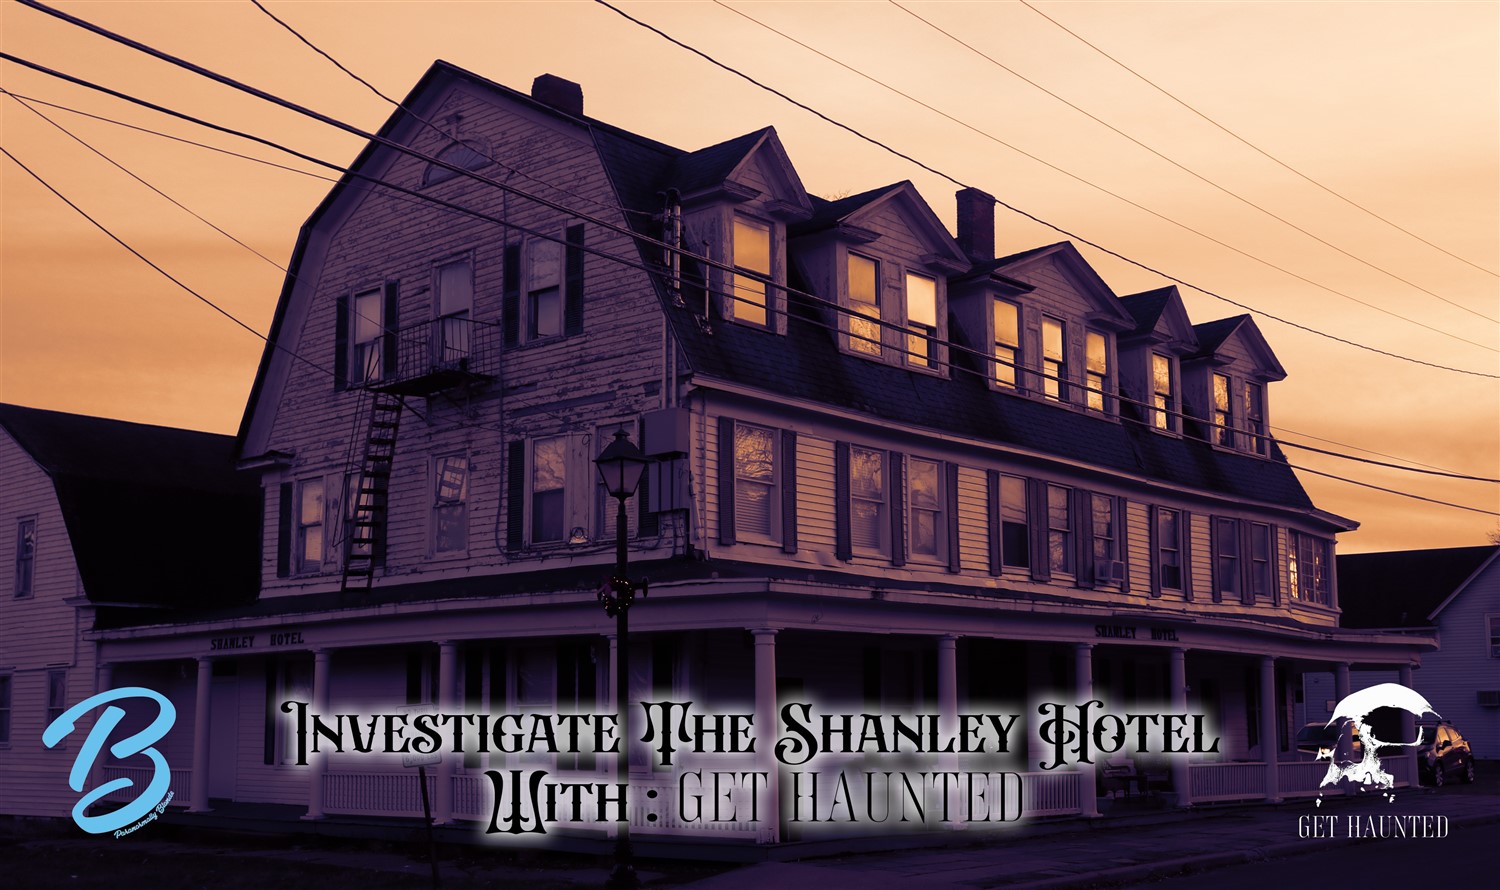 Investigate the Shanley Hotel! With Get Haunted! on Mar 25, 17:00@Shanley Hotel - Buy tickets and Get information on Thriller Events thriller.events